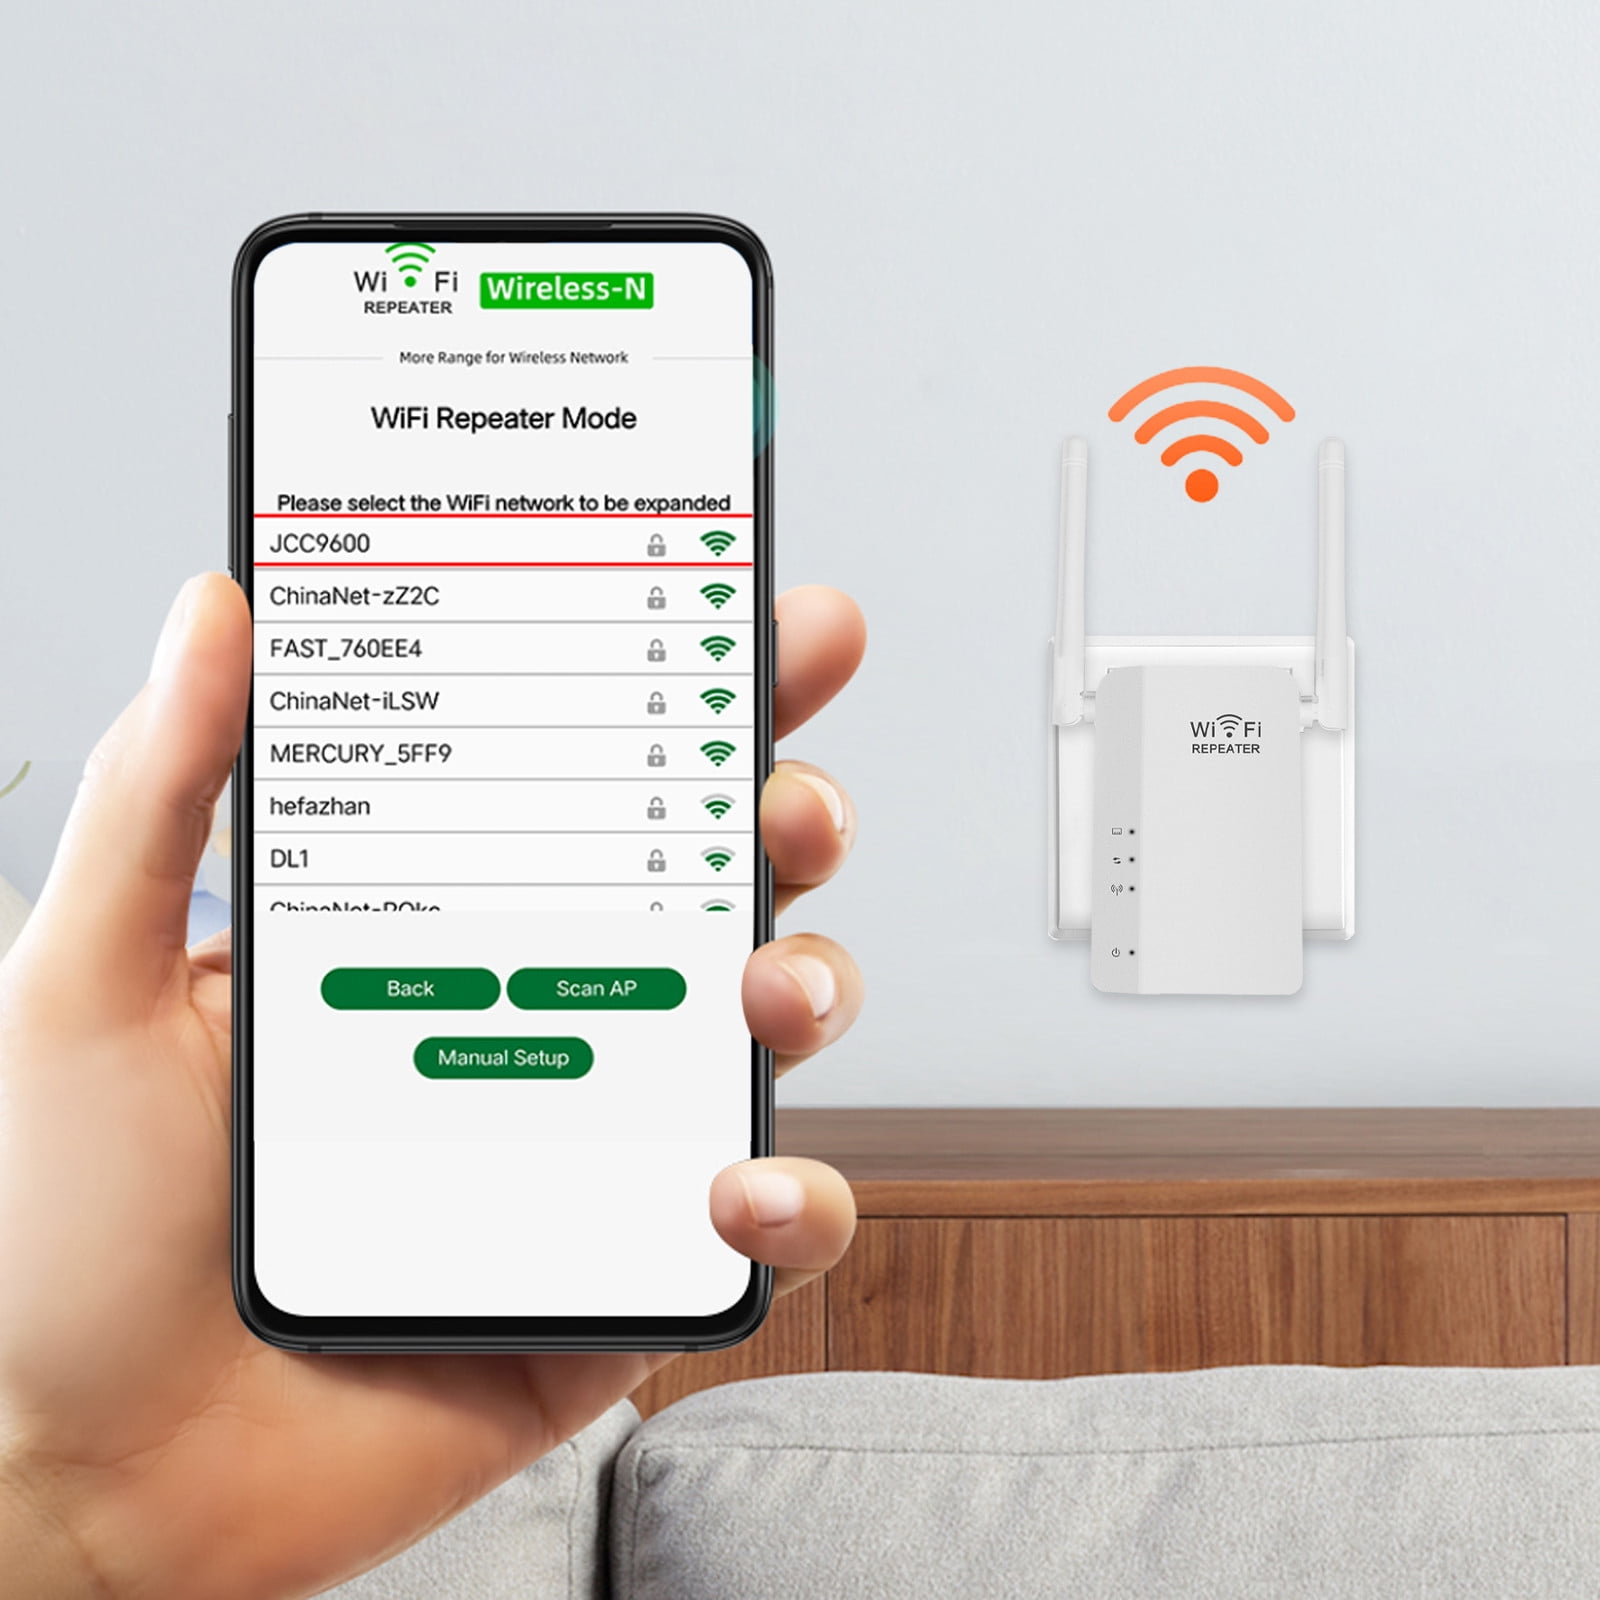 prik lave mad Skibform Tiitstoy WiFi Extender WiFi Booster 300Mbps WiFi Amplifier WiFi Range  Extender WiFi Repeater for Home 2.4GHz On-ly - Walmart.com